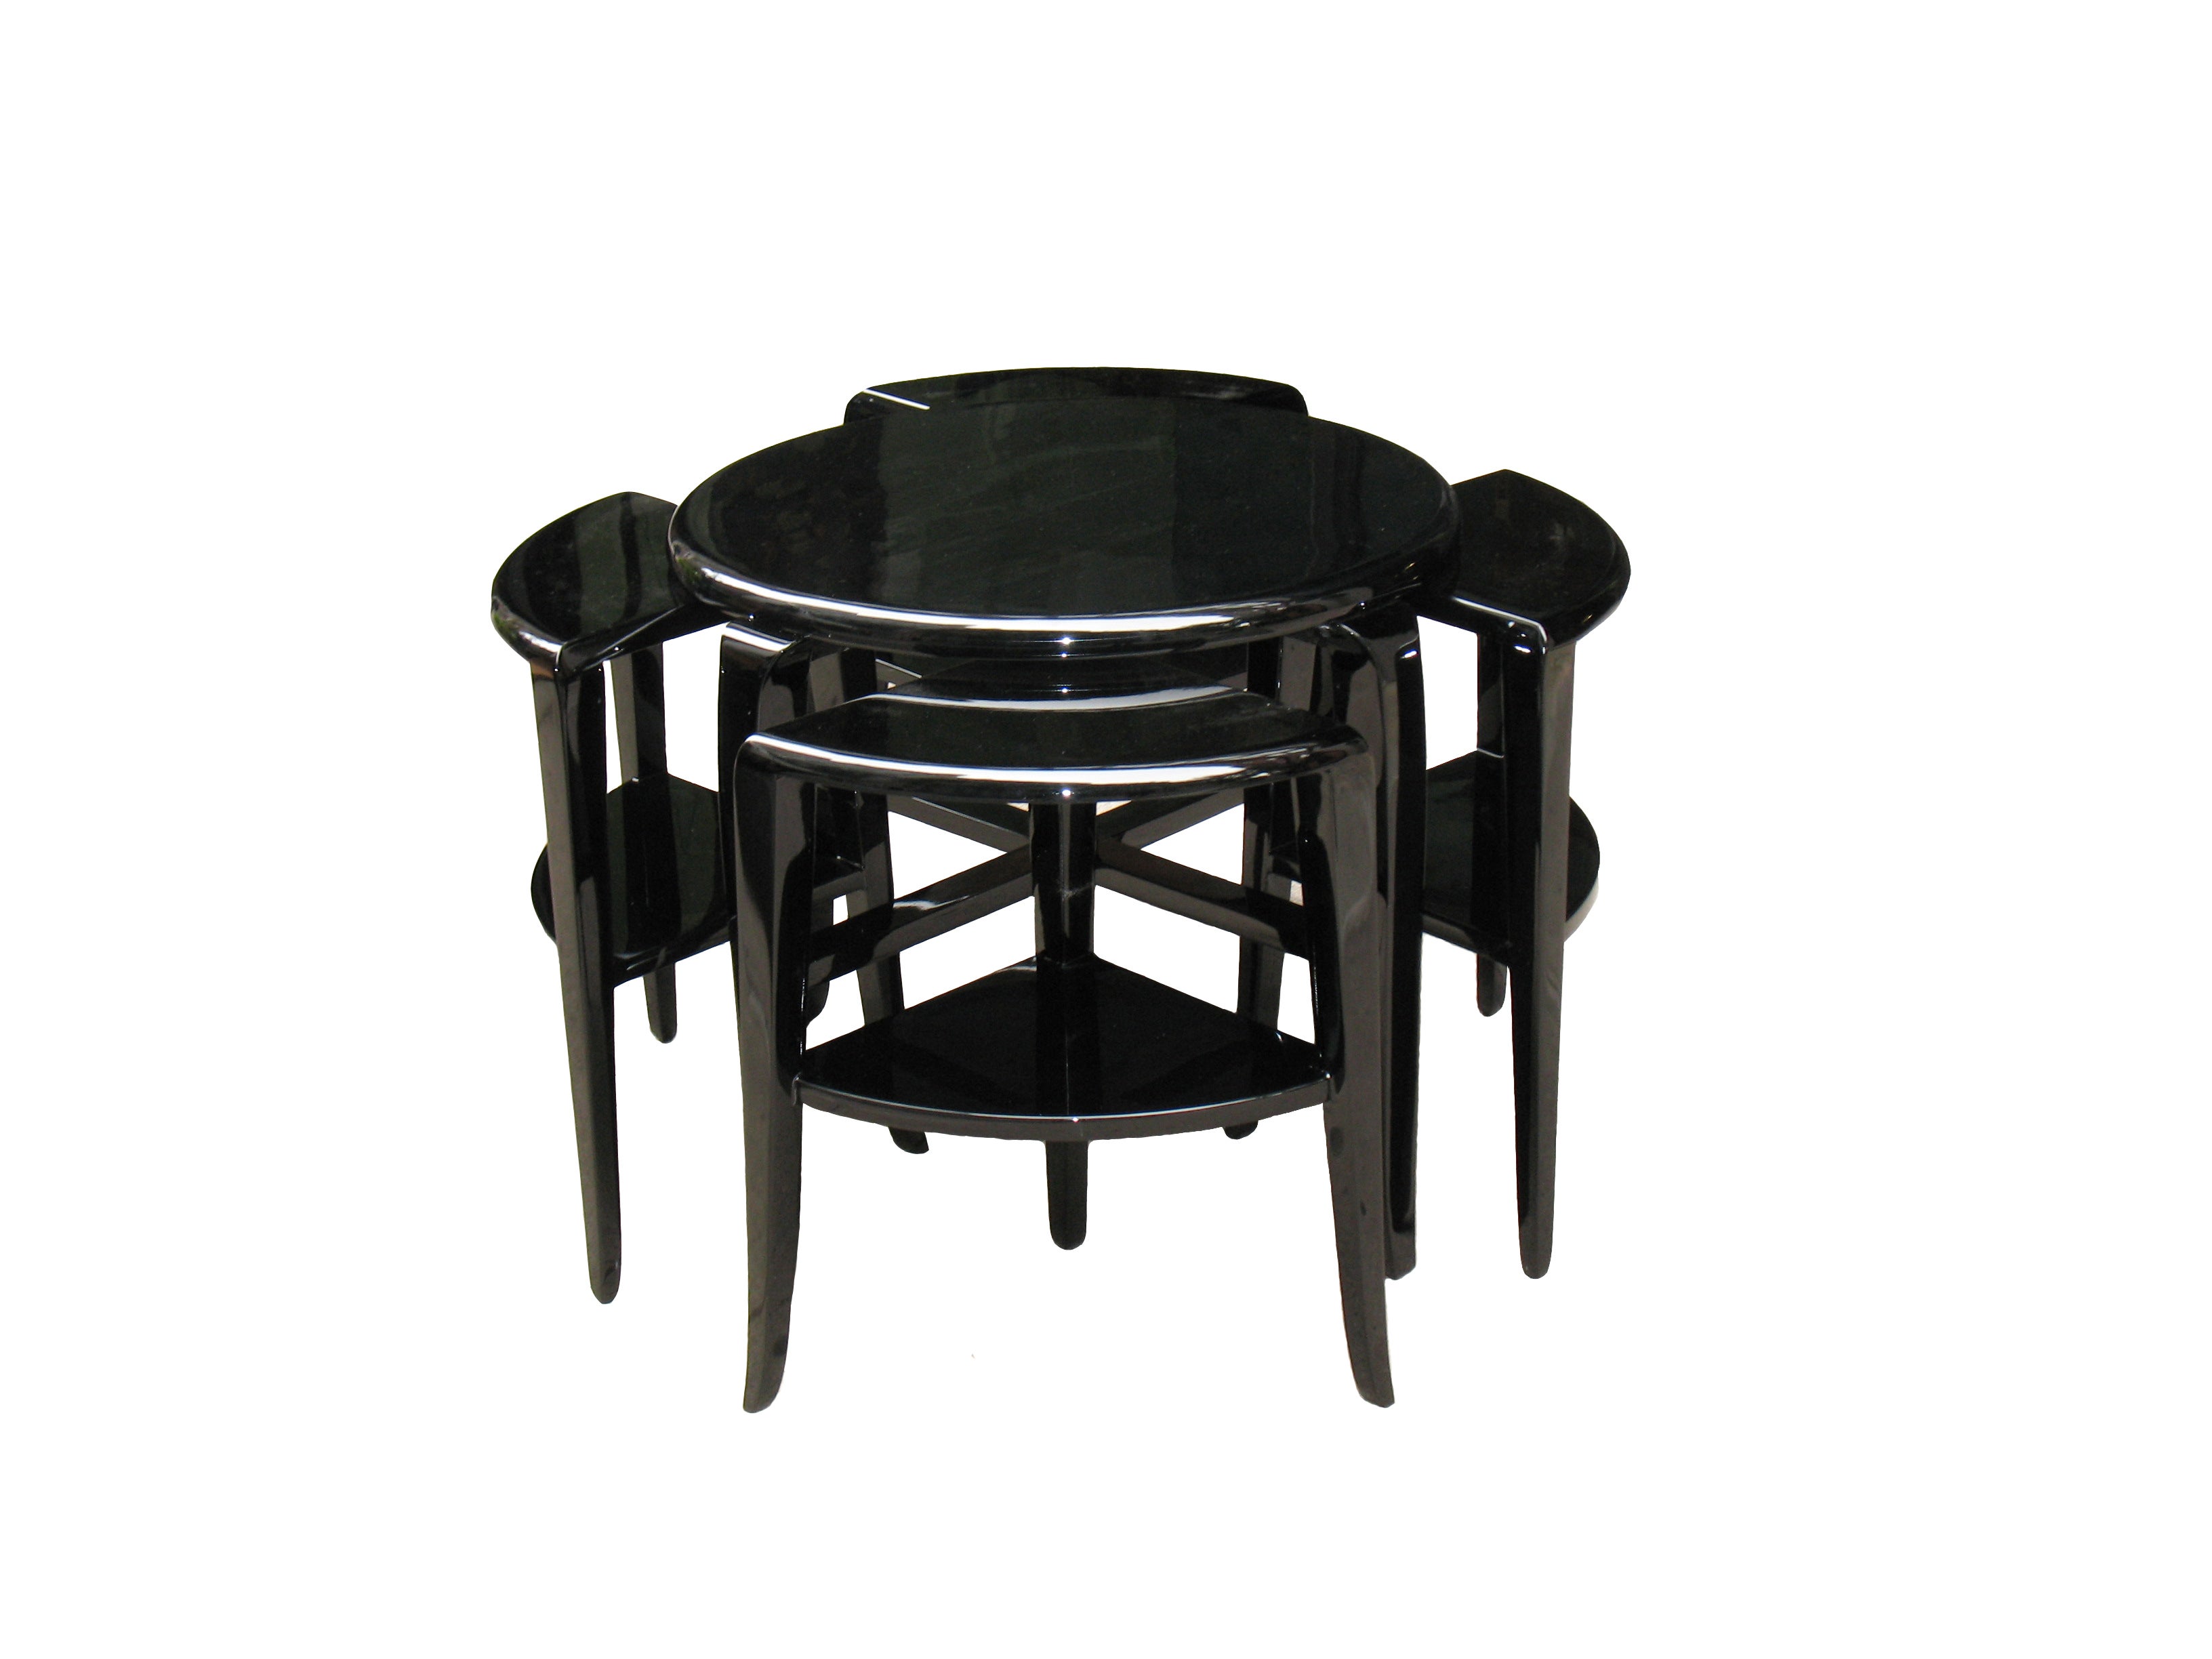 Rare French Art Deco Nest of Tables